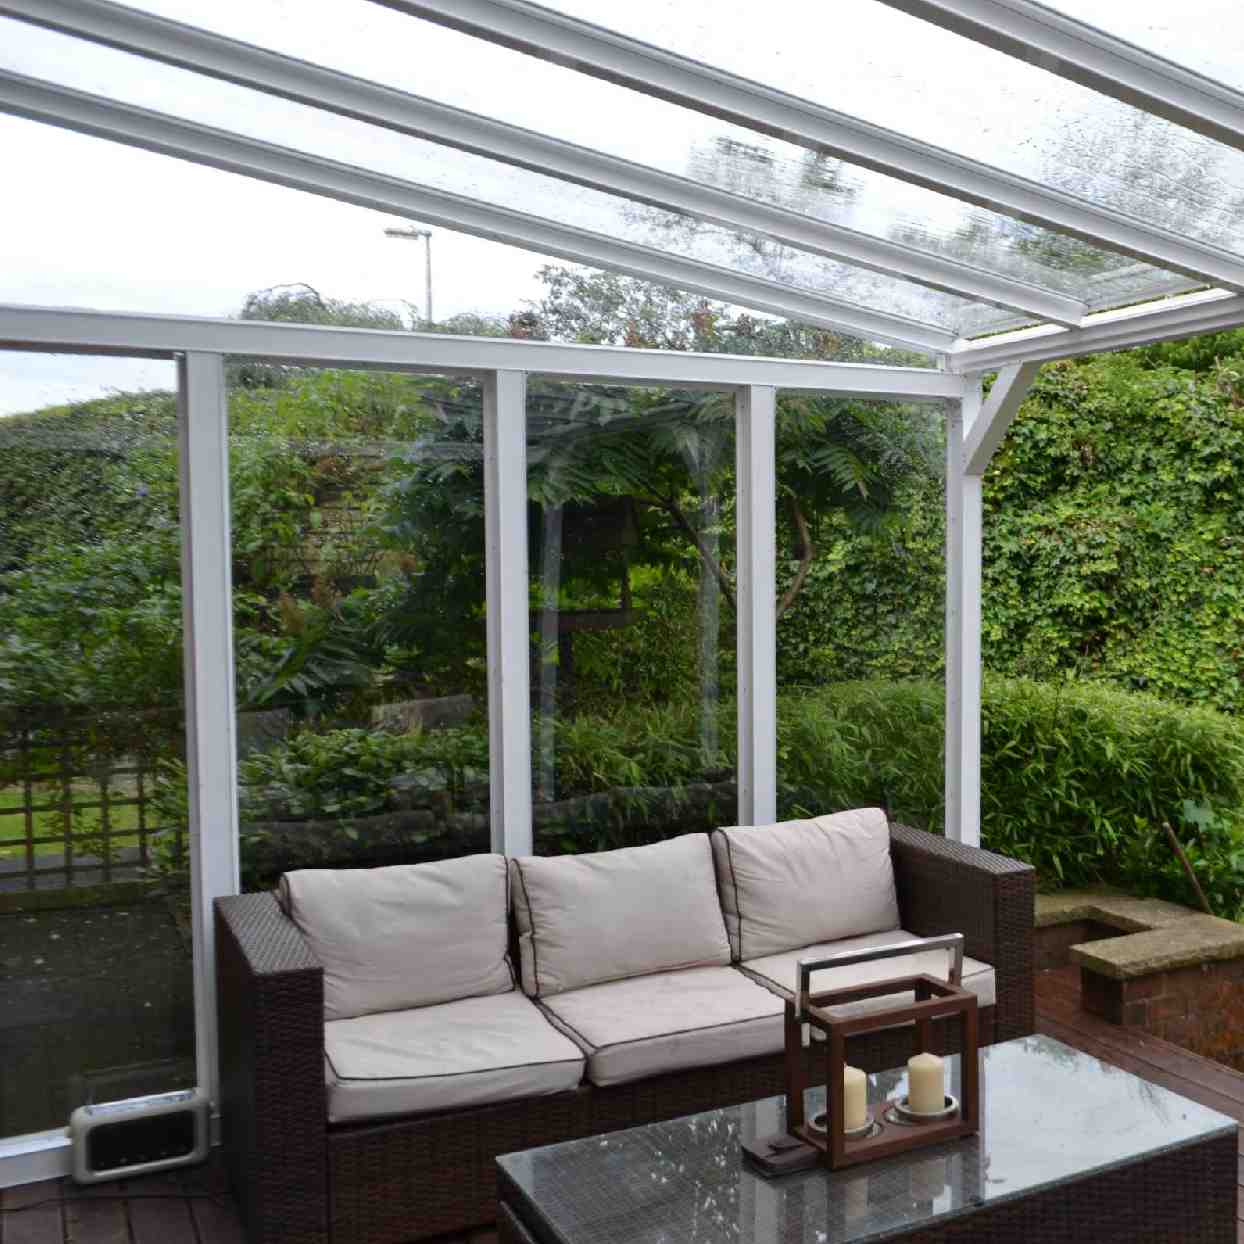 Buy Omega Verandah White with 16mm Polycarbonate Glazing - 9.2m (W) x 3.5m (P), (5) Supporting Posts online today